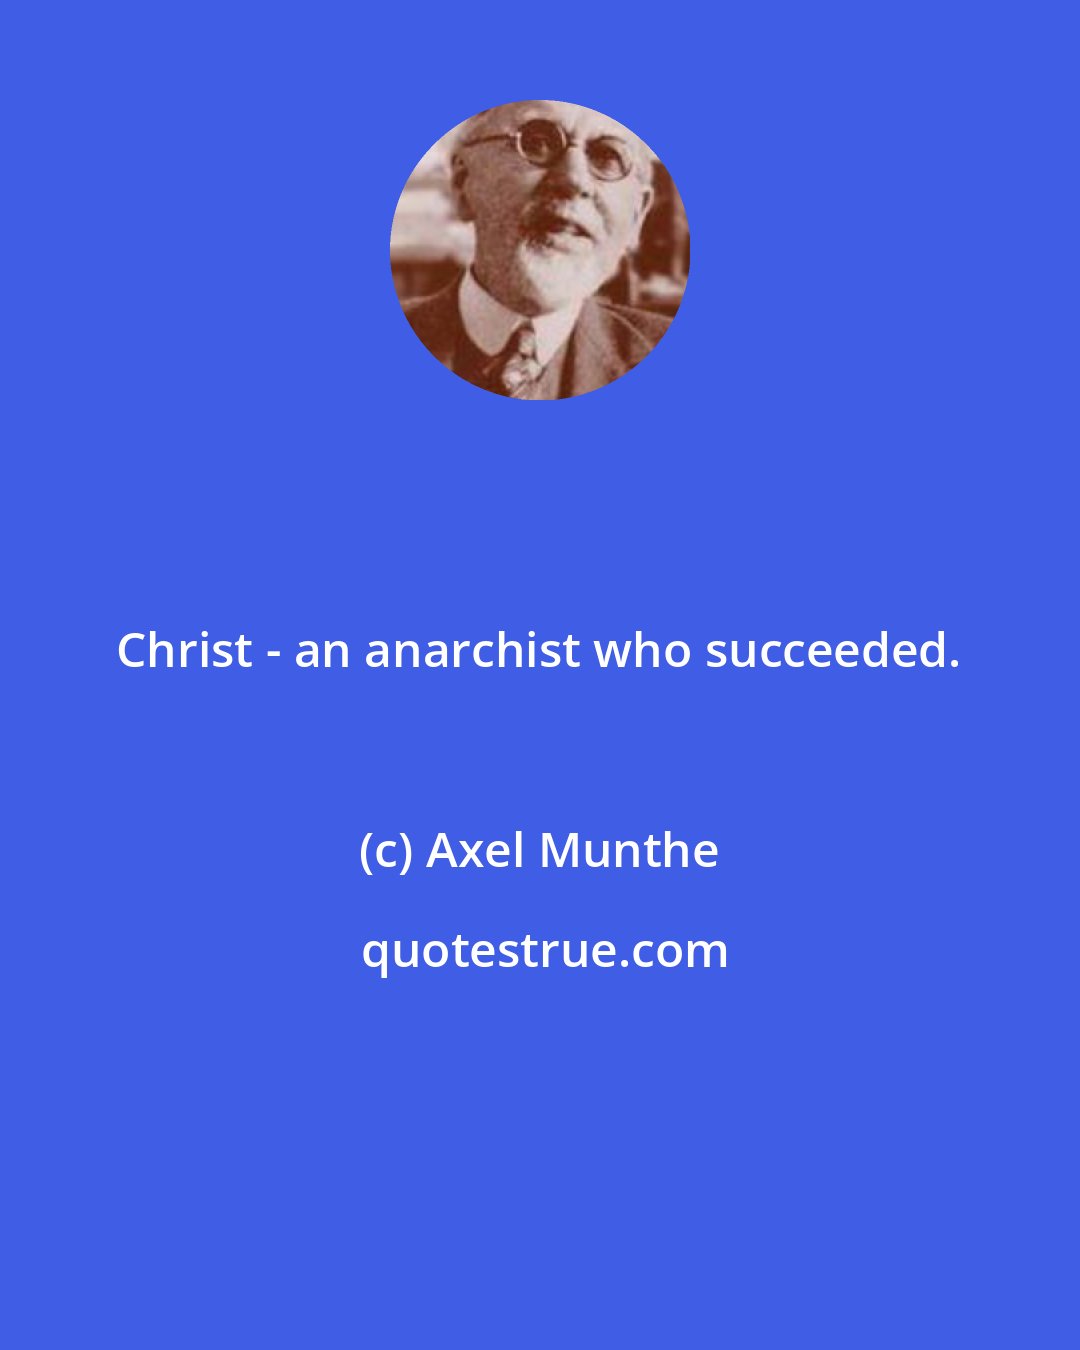 Axel Munthe: Christ - an anarchist who succeeded.